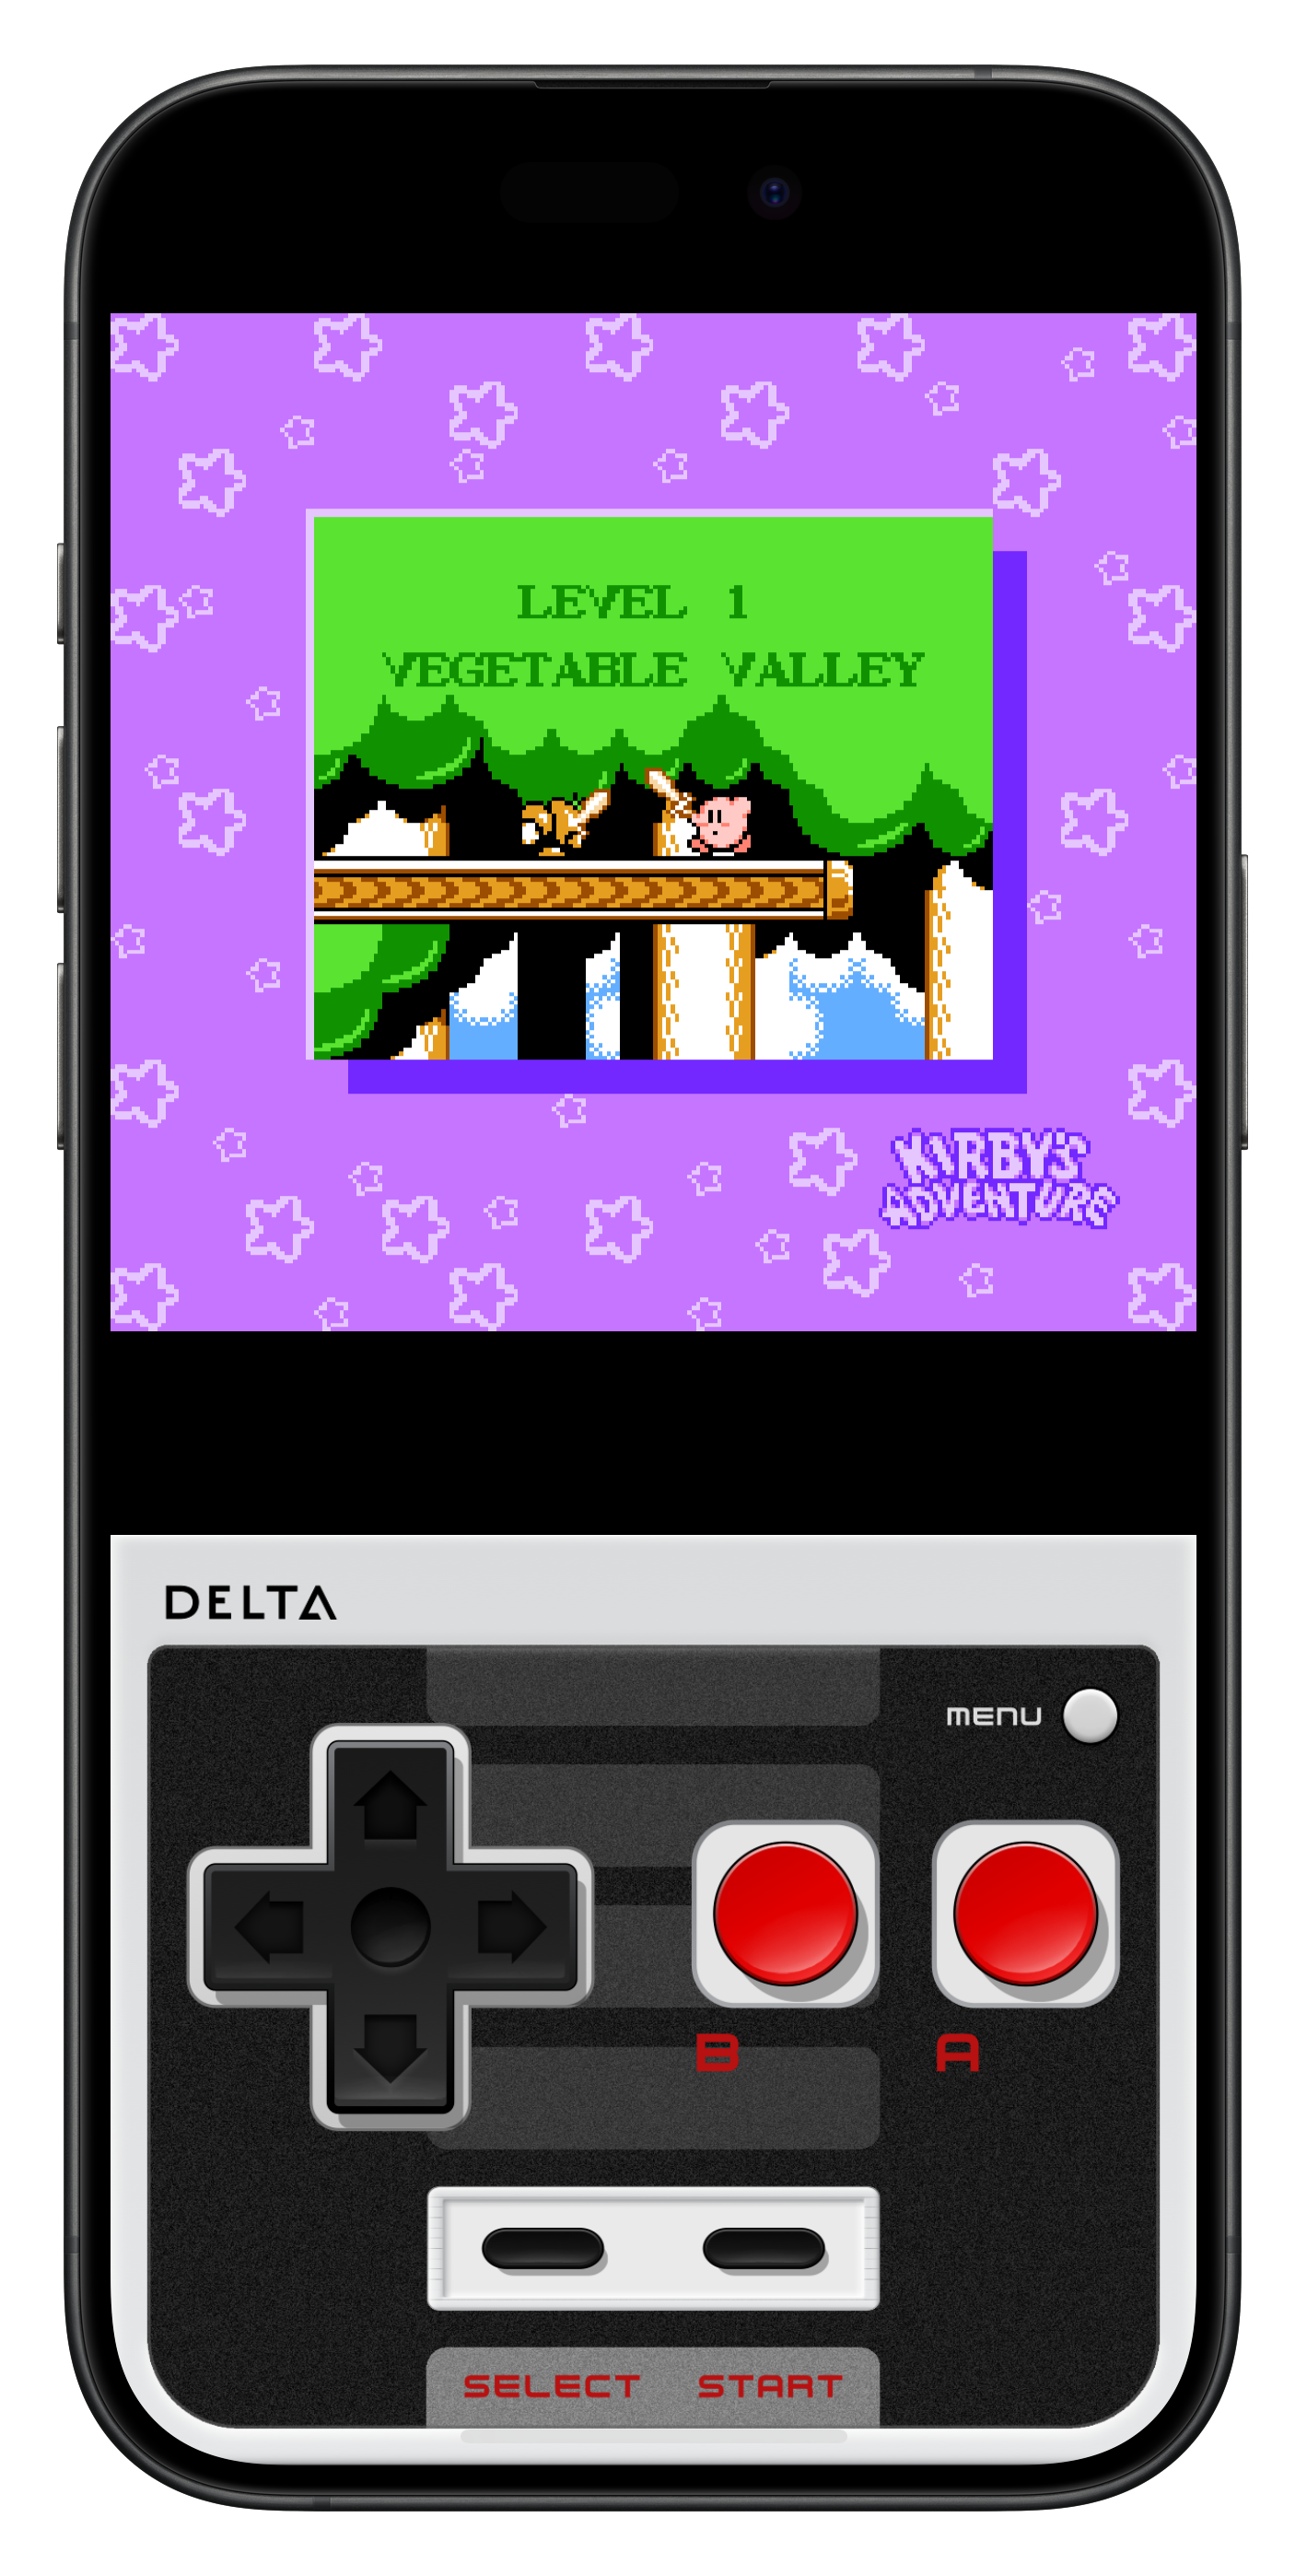 A smartphone displays 'LEVEL 1 VEGETABLE VALLEY' from the game 'Kirbys Adventure' on the NES, showing a retro game emulation interface with controls.